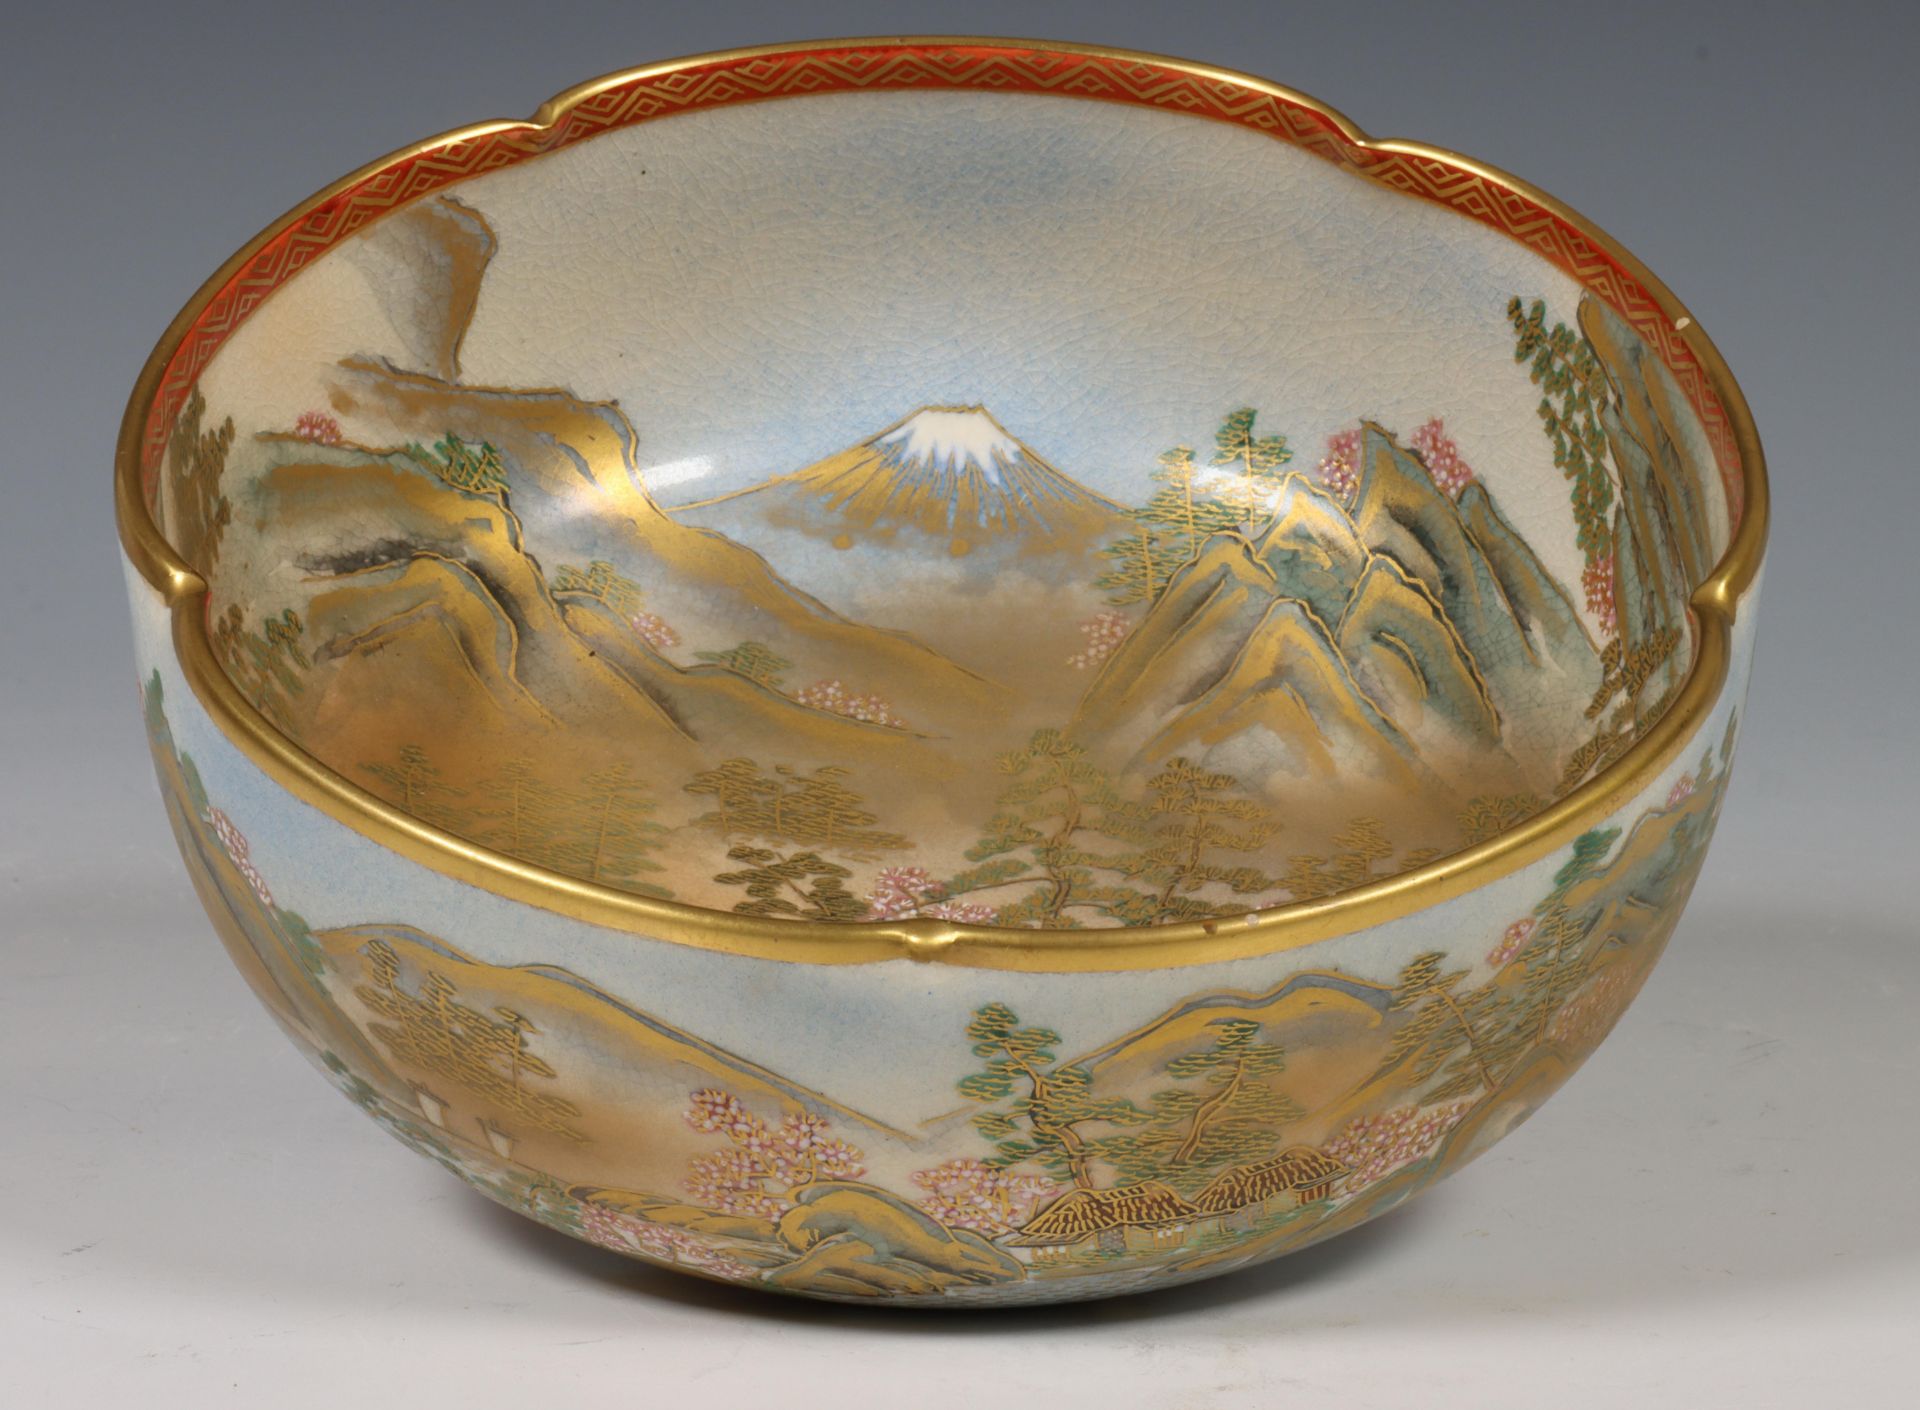 Japan, Satsuma porcelain bowl, 20th century, decorated to the interior with pavilion with mount Fuji